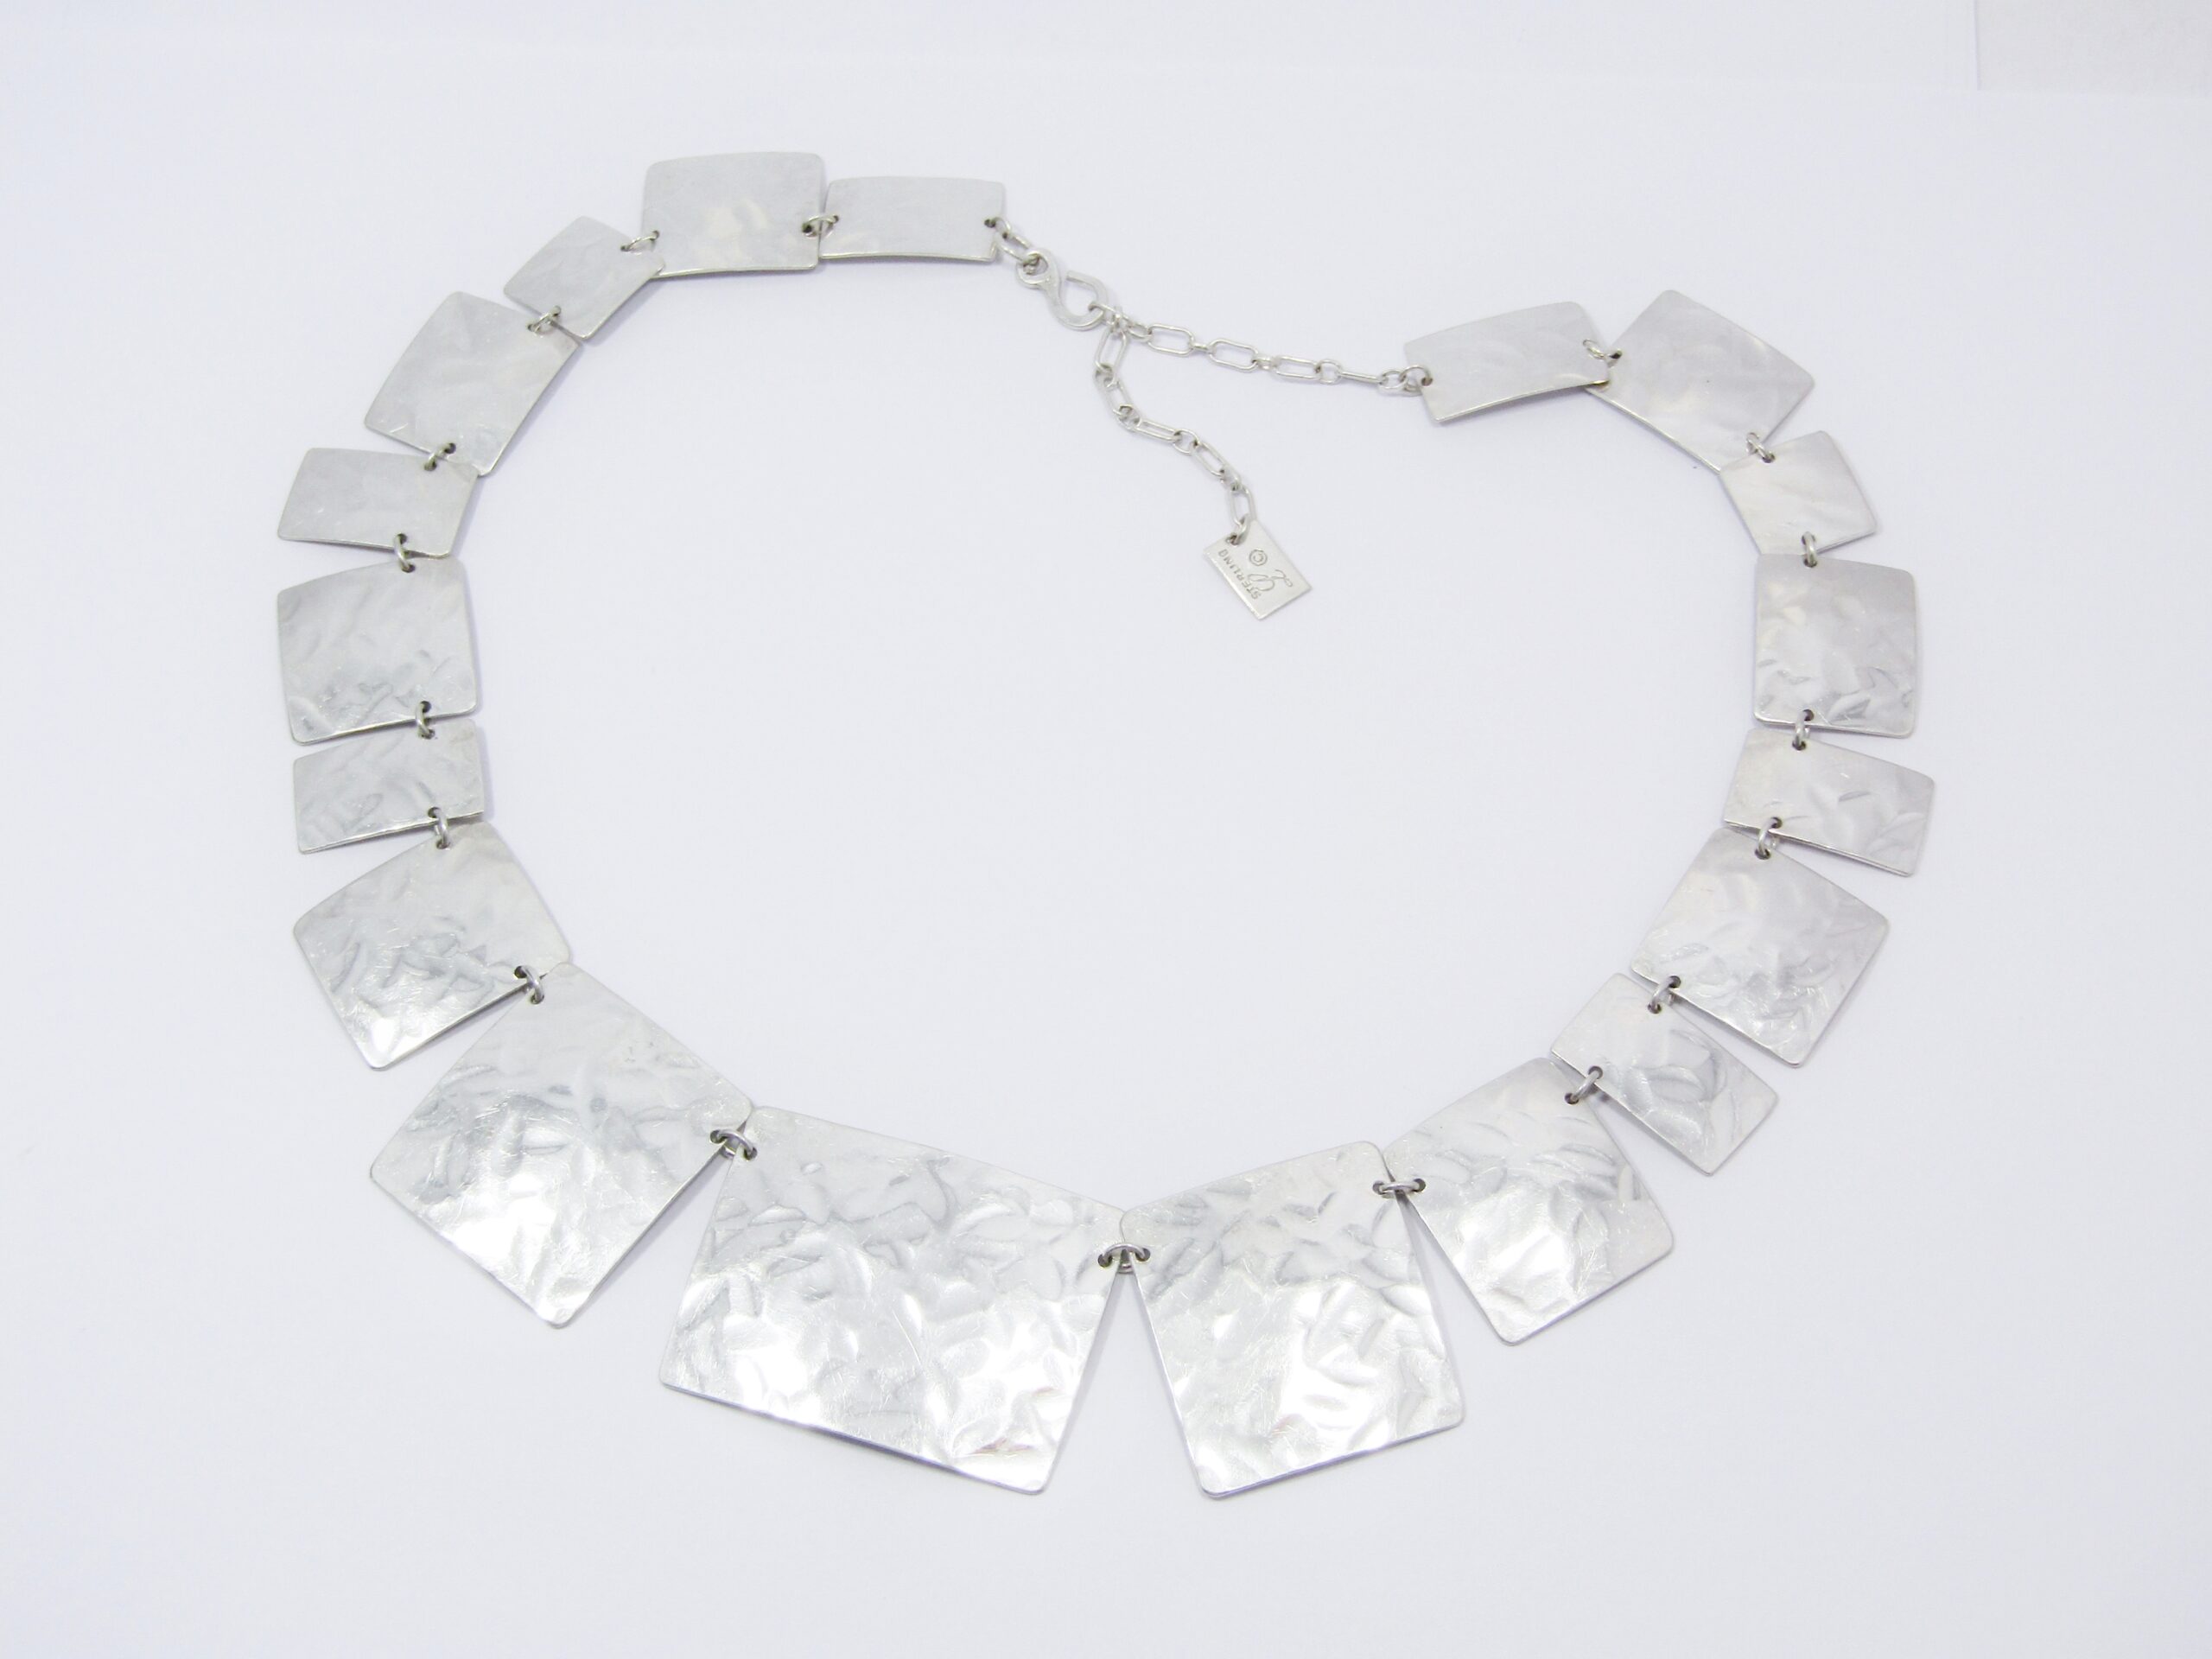 A Gorgeous Handmade Hammered Designed Necklace in Sterling Silver.